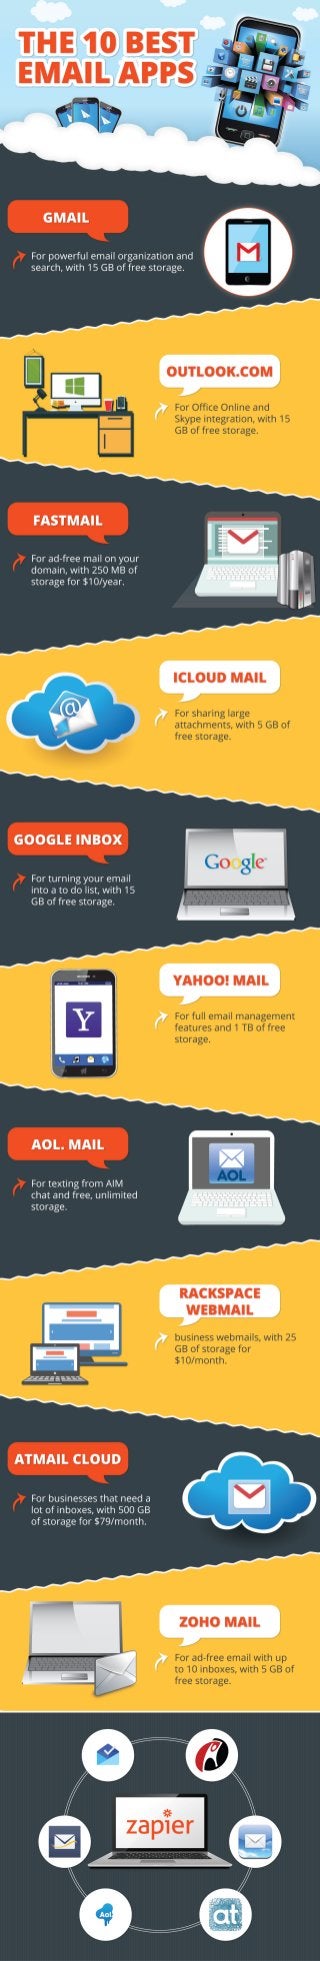 The 10 Best Email Services